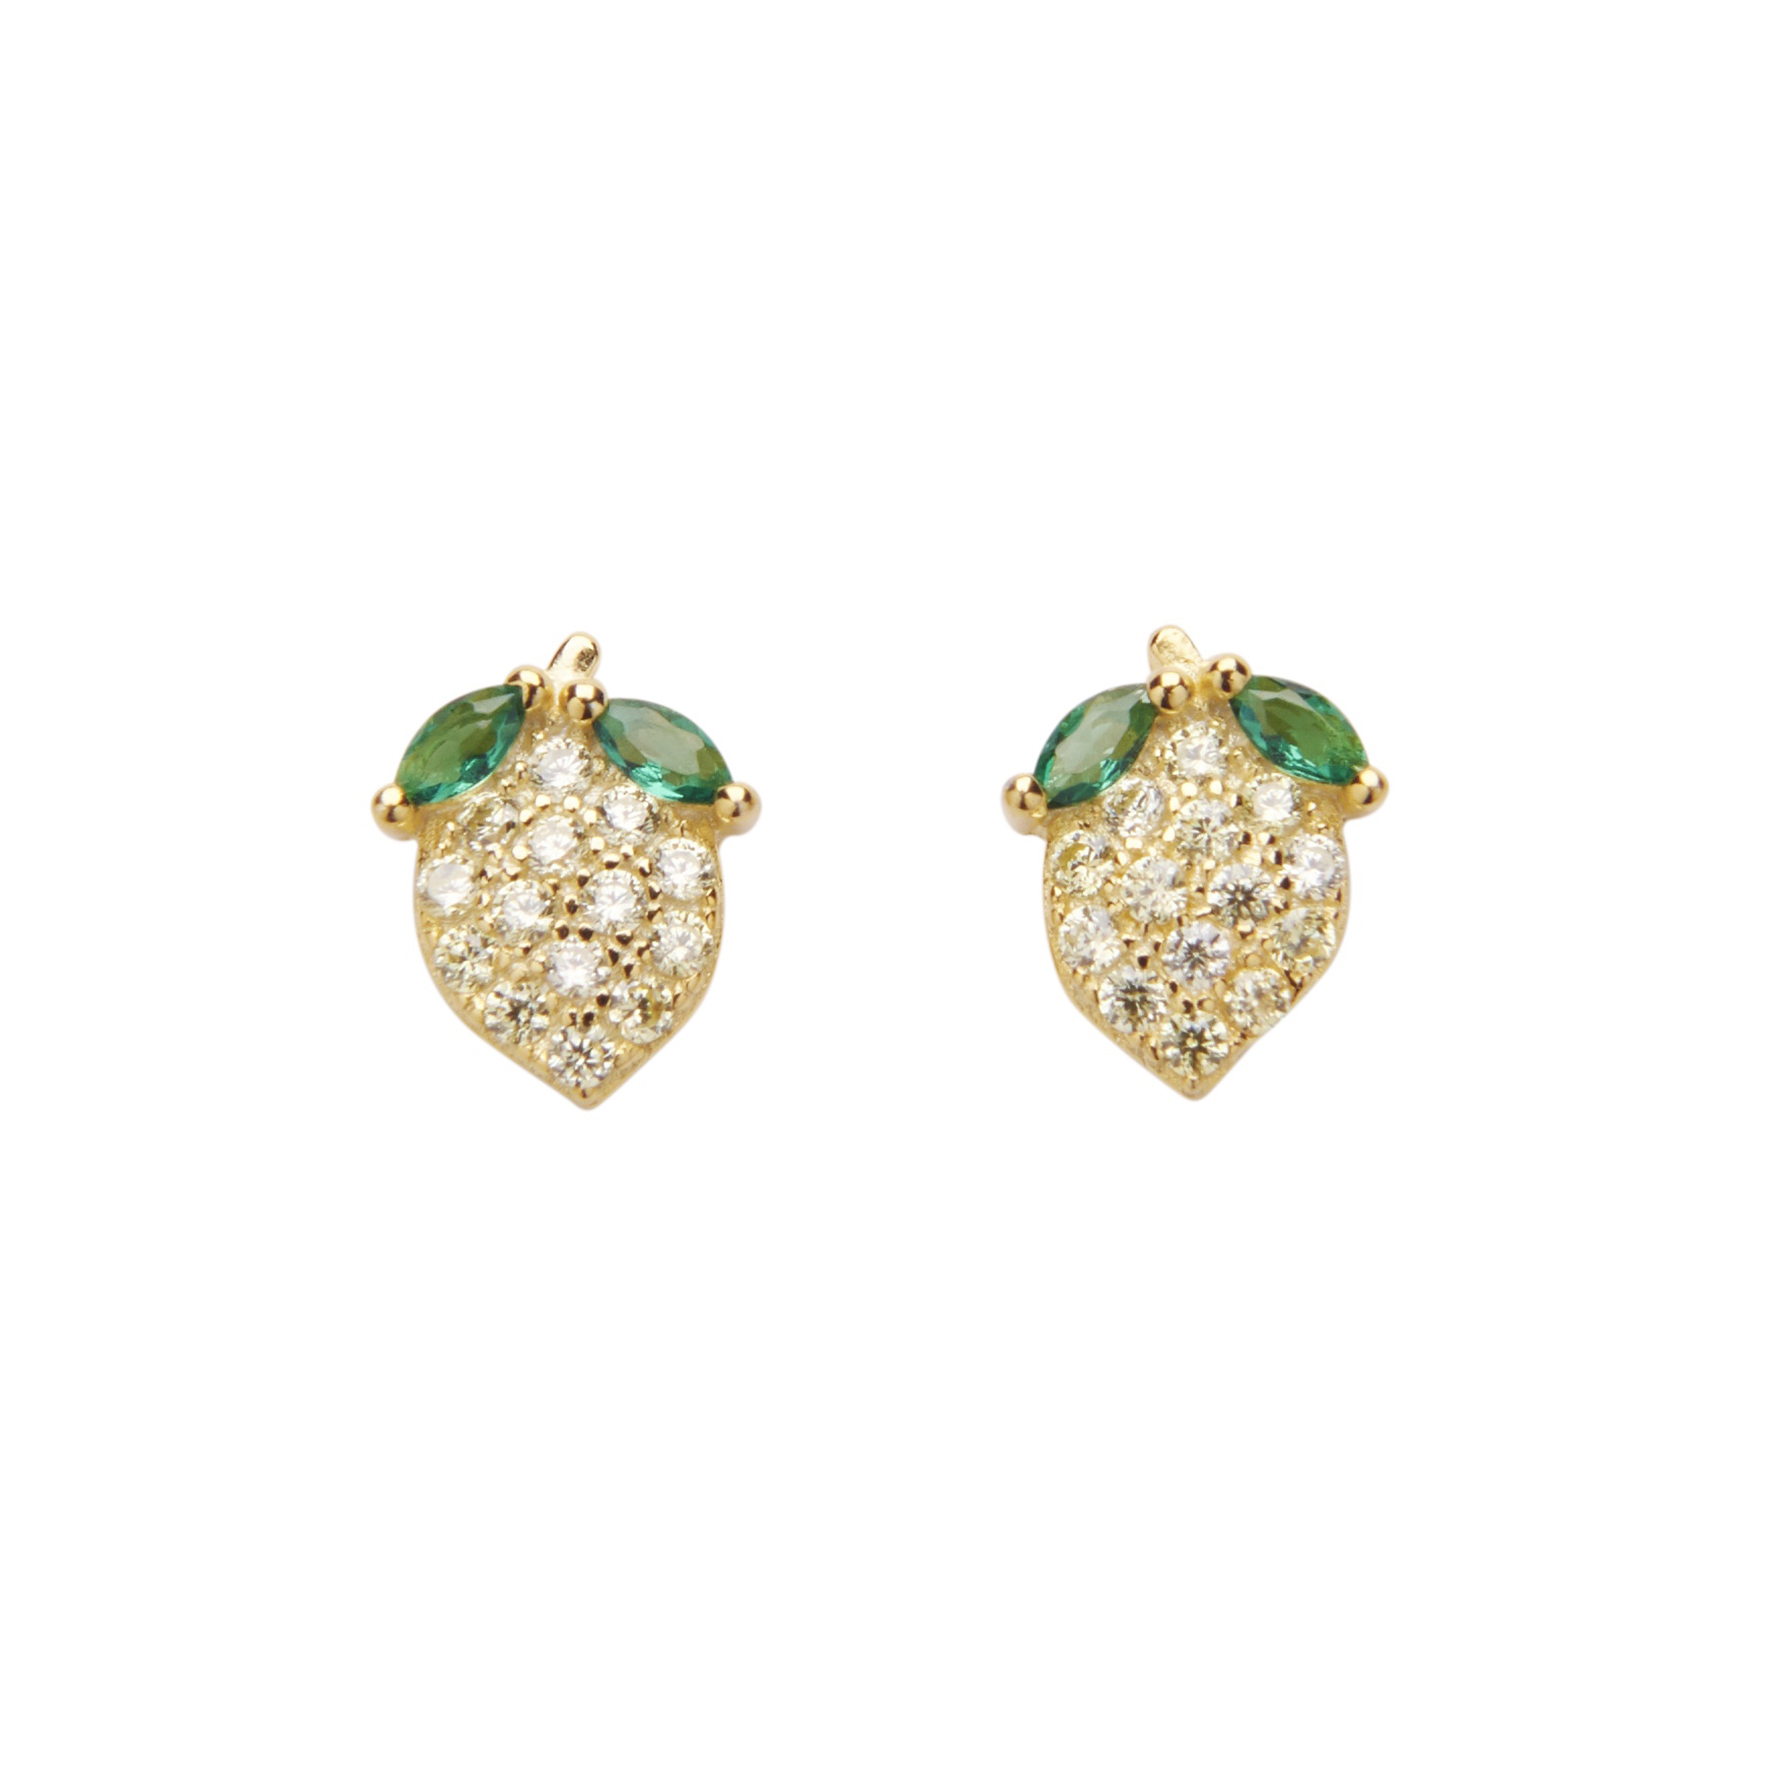 Pretty Lemon Crystal Studs from Pico in Goldplated Silver Sterling 925